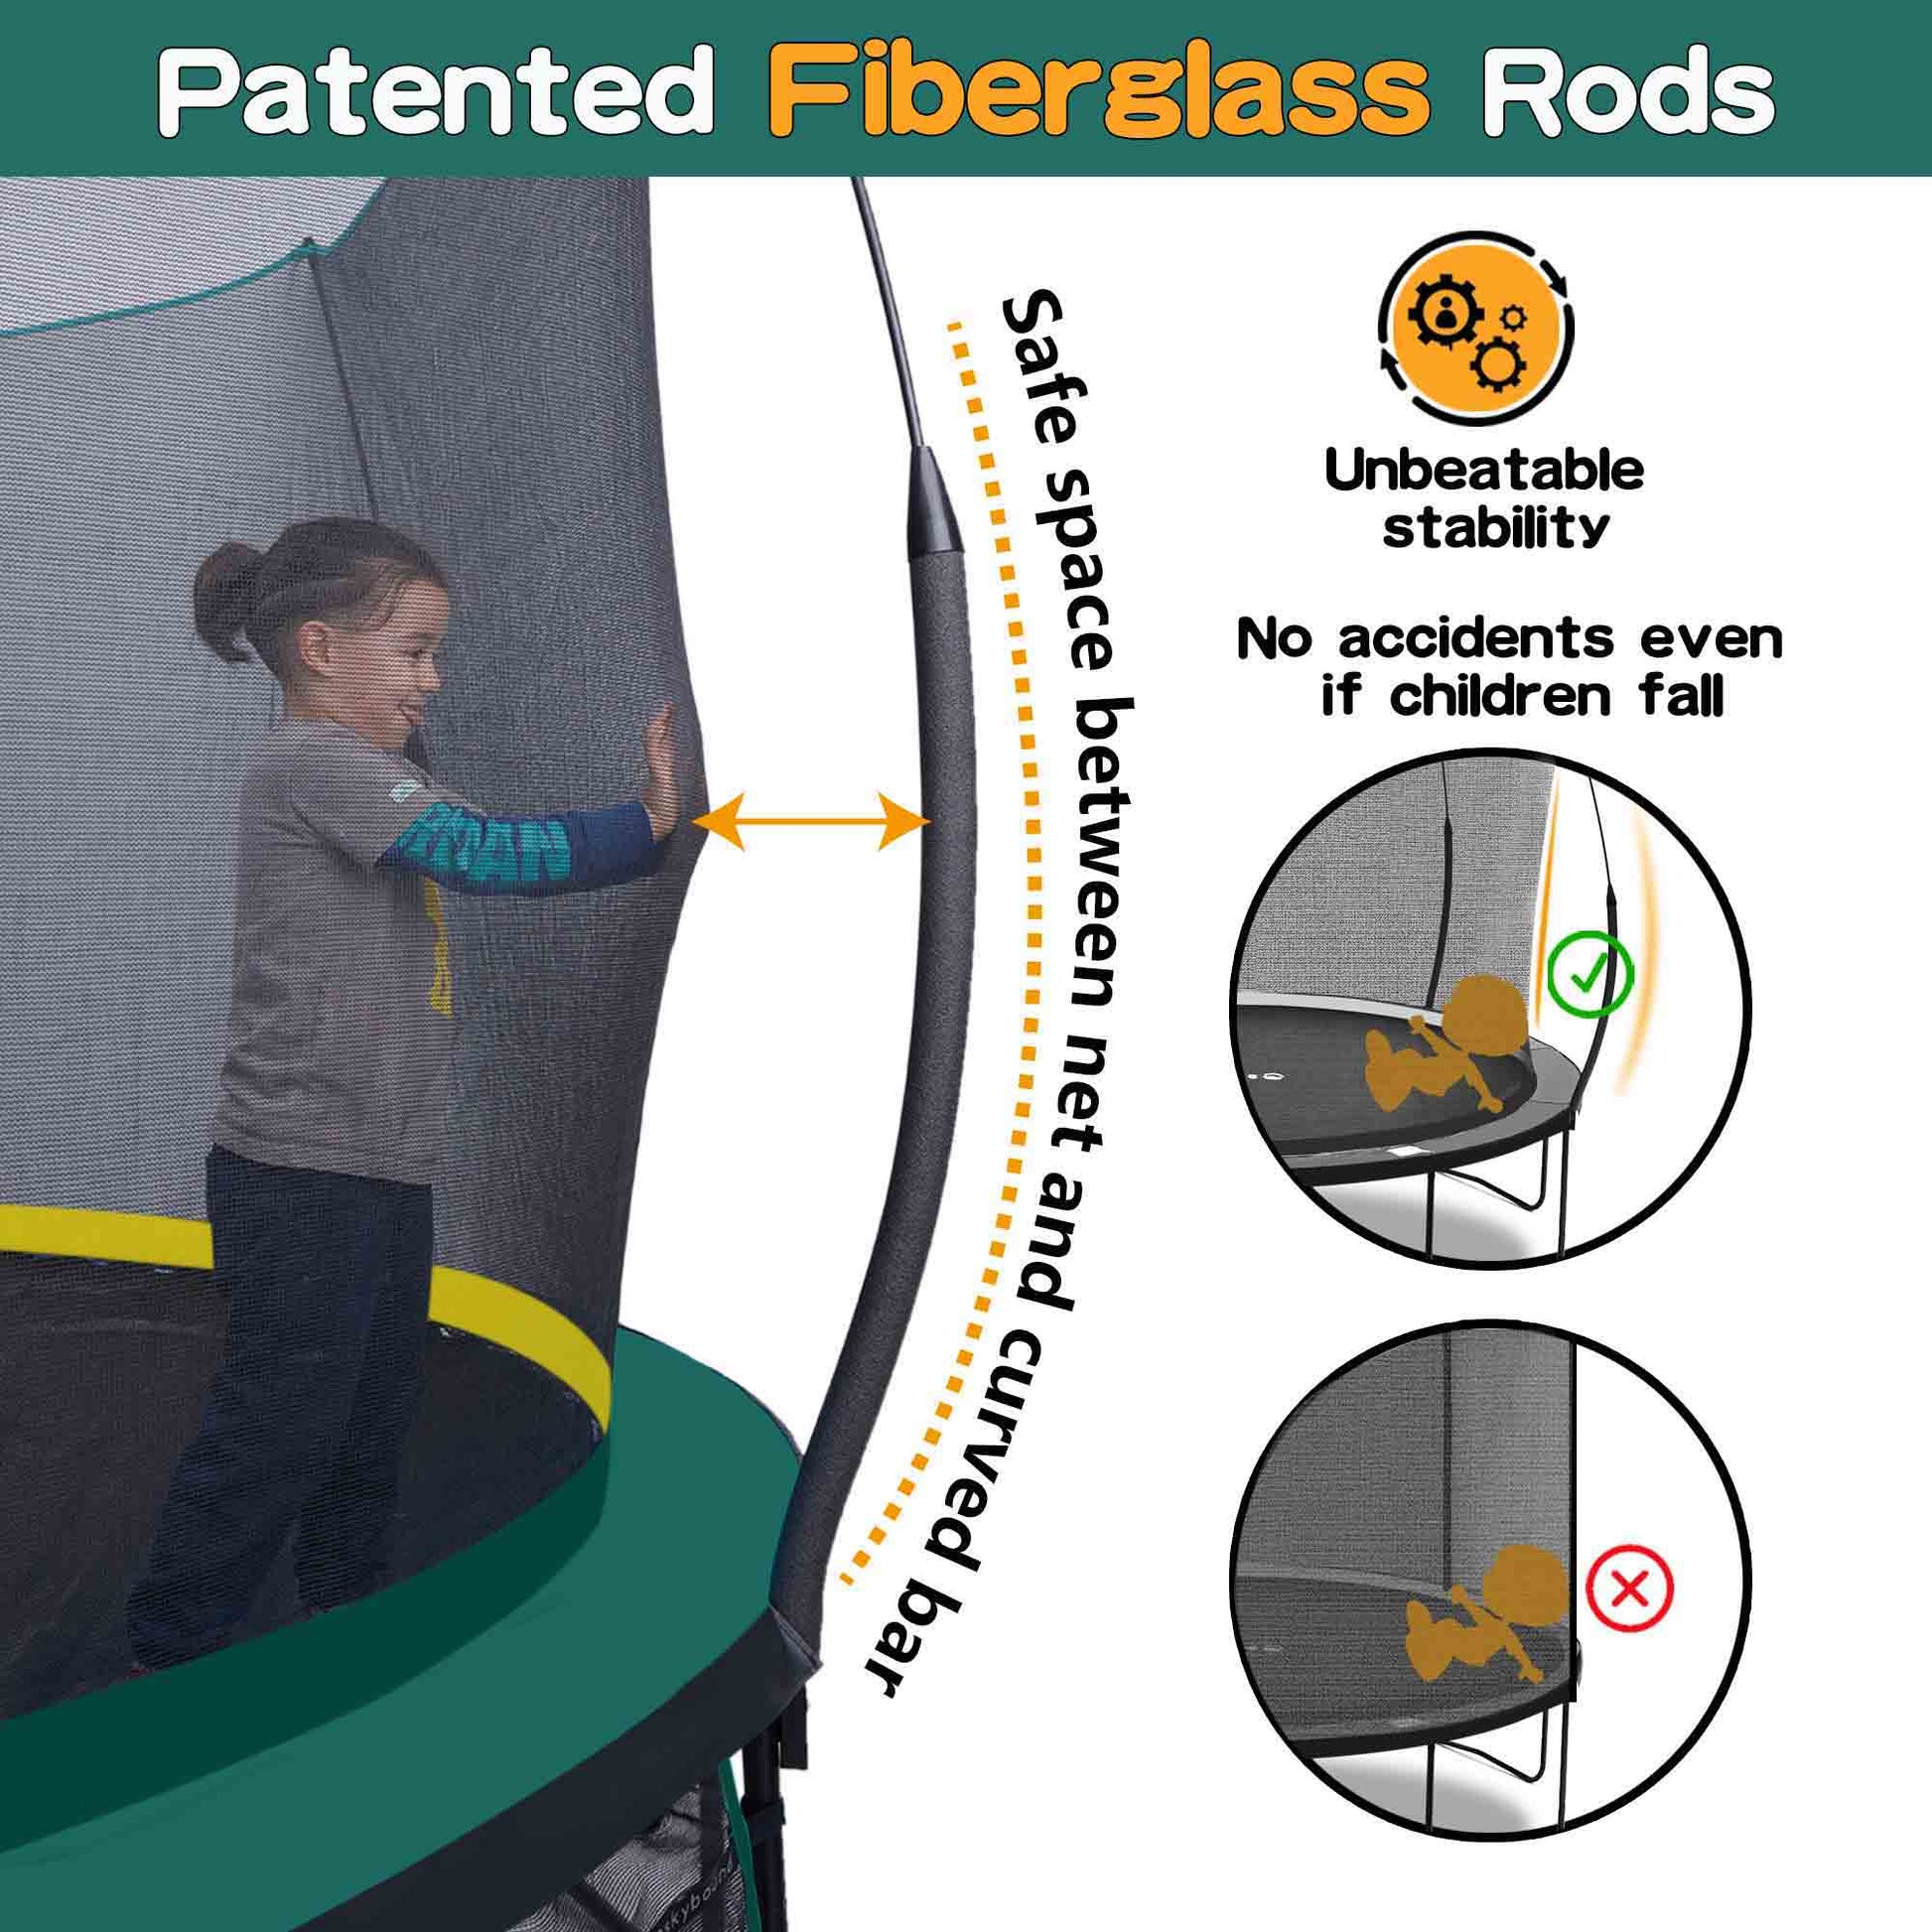 Title: Patent fiberglass bending pole Description: On the left, a little girl is pushing the trampoline net on a 10ft springfree trampoline. On the right, it says the safe space between the net and the pole, No accidents even if children fall.